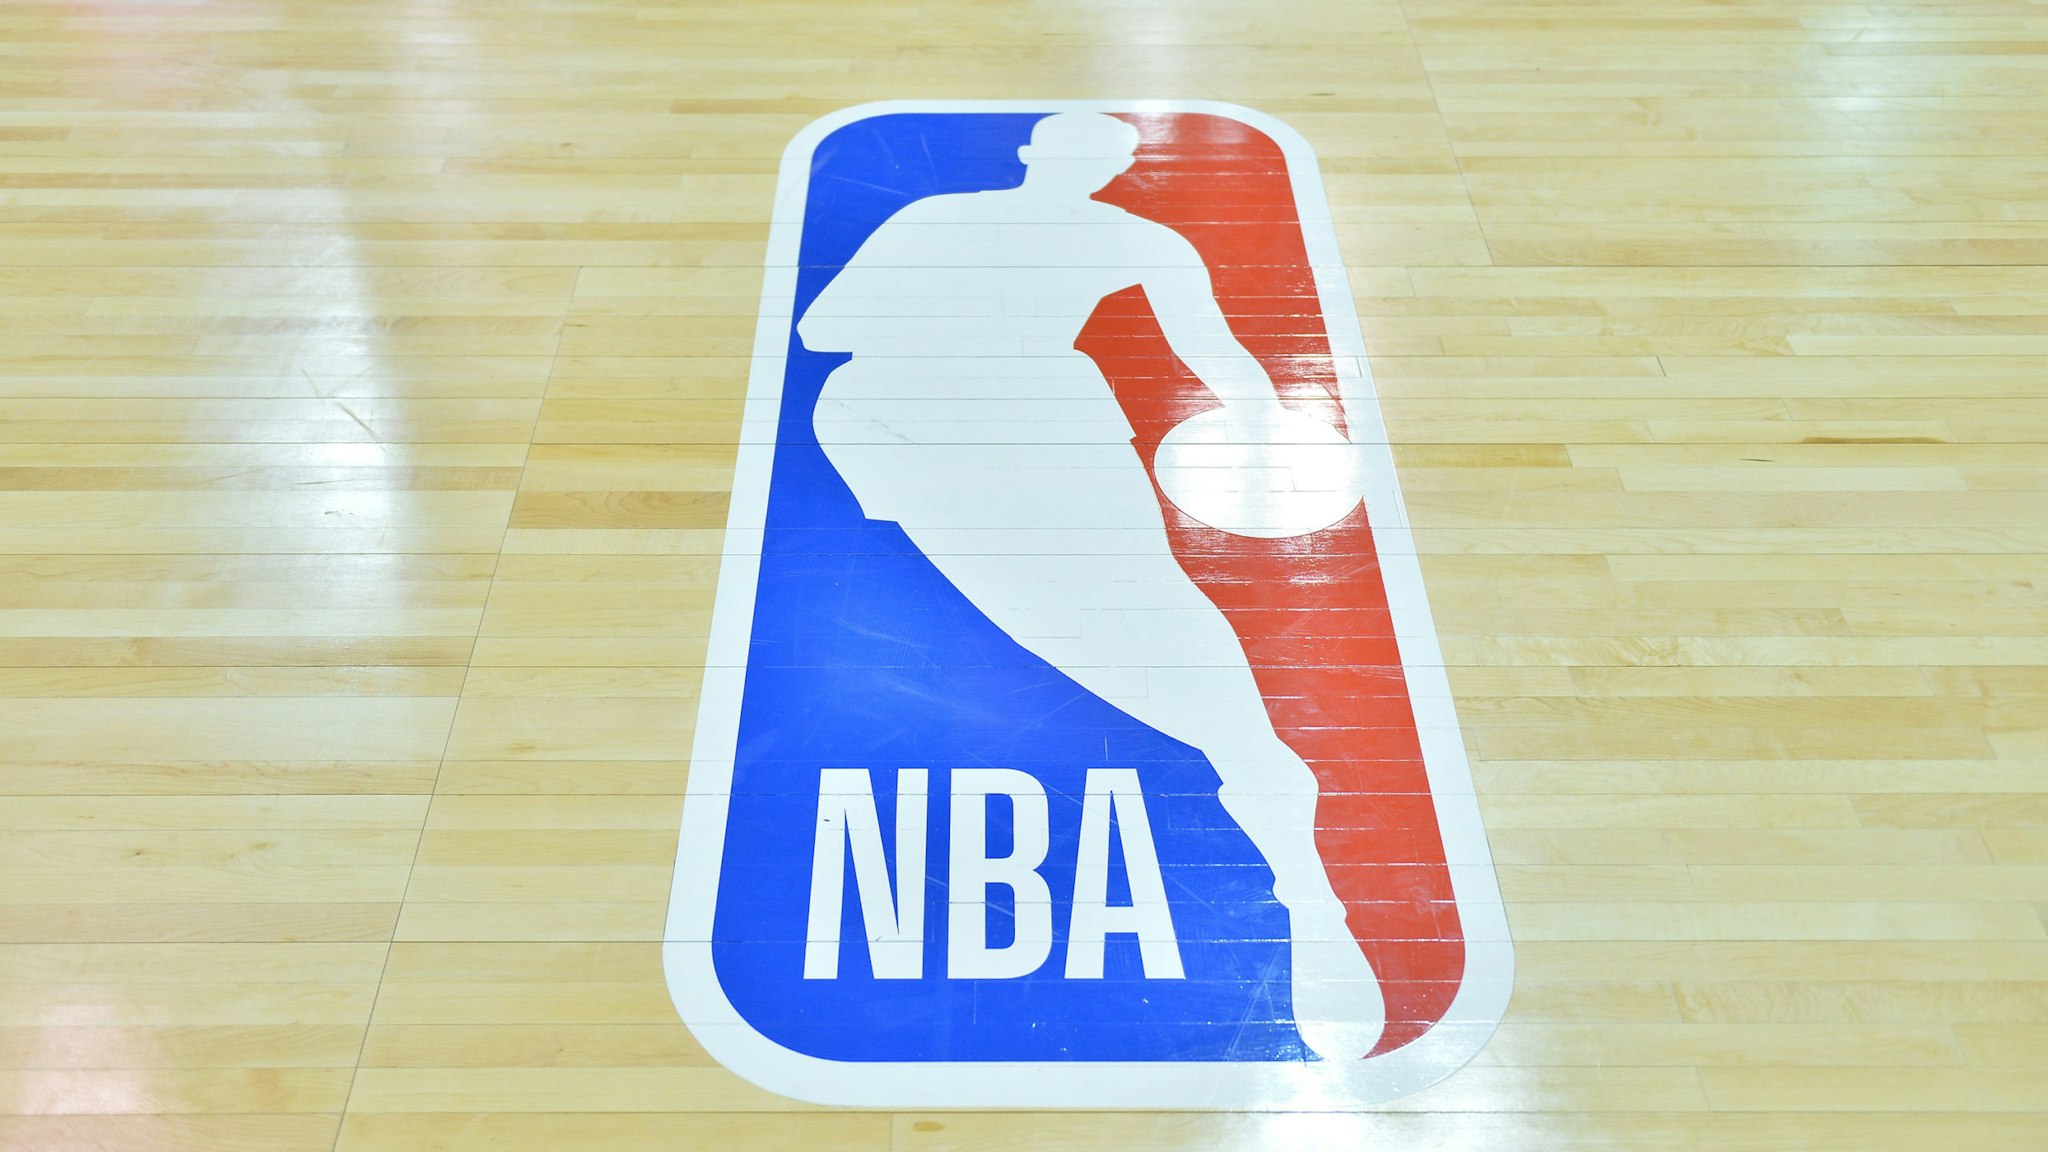 LAS VEGAS, NV - JULY 09: A general view of the court shows the NBA logo during a game between the Sacramento Kings and the Memphis Grizzlies during the 2017 NBA Summer League at the Cox Pavilion on July 9, 2017 in Las Vegas, Nevada. The NBA unveiled a refreshed logo during the 2017 Las Vegas Summer League. A modified version of Action font, customized for the league, will be used for the letters N-B-A in the primary logo.